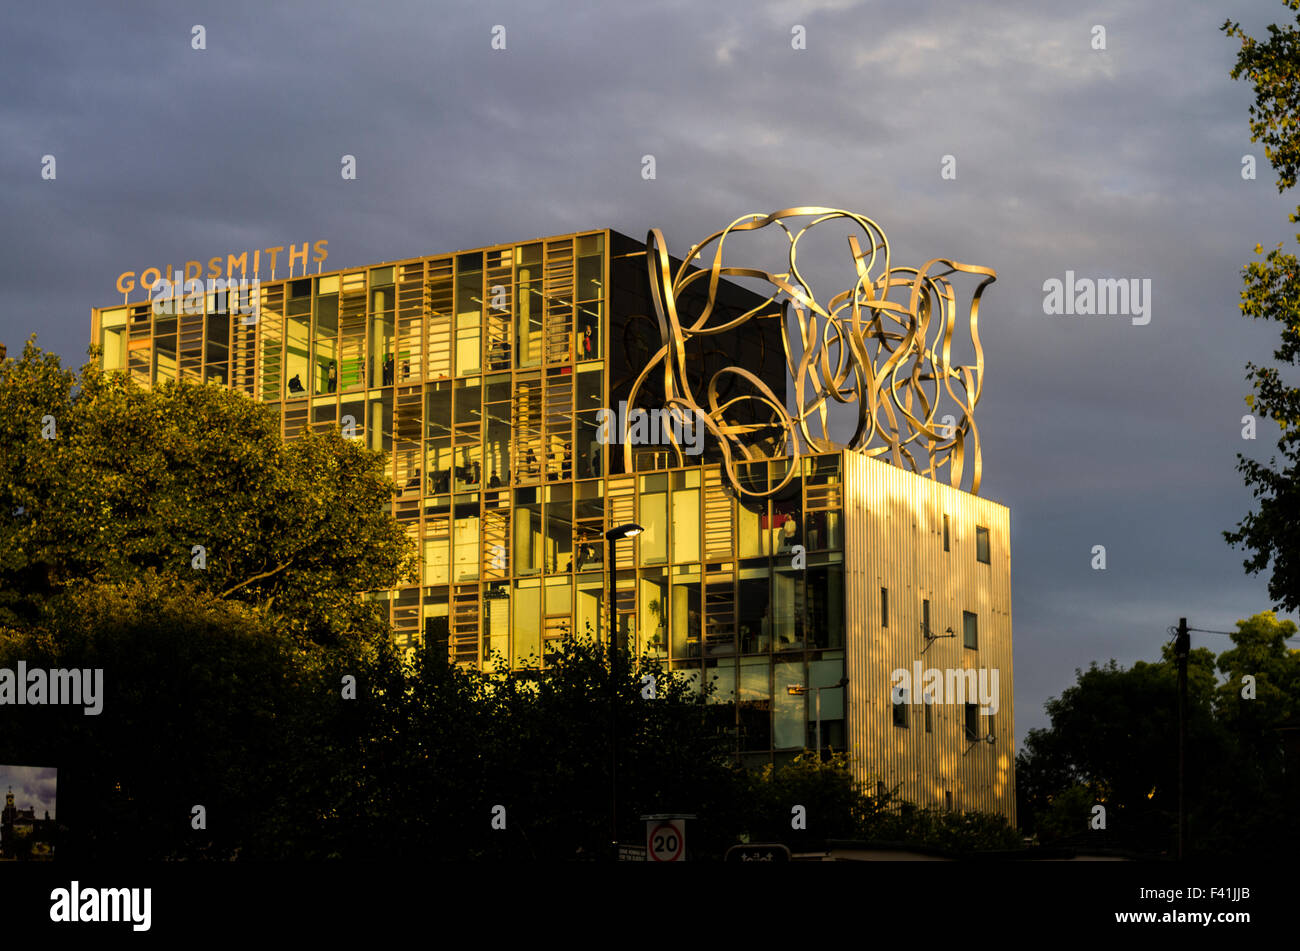 Goldsmiths, University of London, in New Cross, London bathed in dramatic yellow sunlight with a cloudy sky. Stock Photo